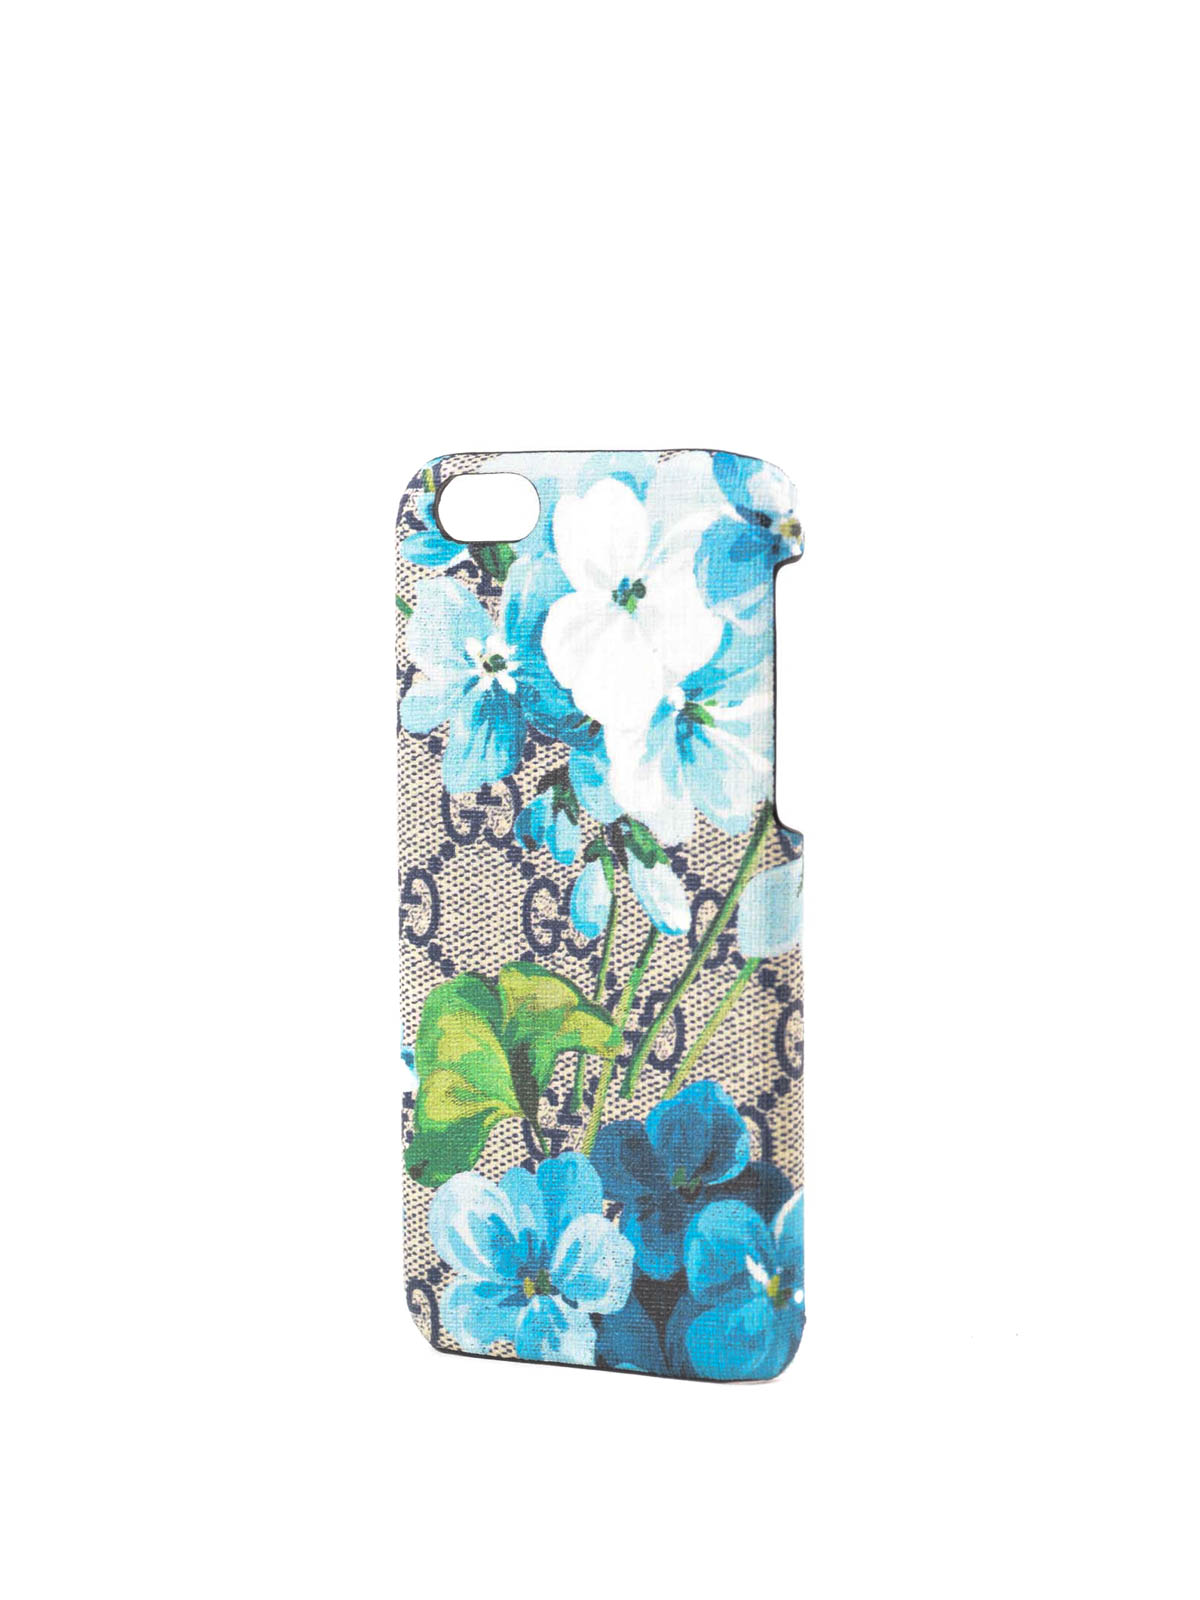 Gucci - GG Blooms iPhone 6 cover 